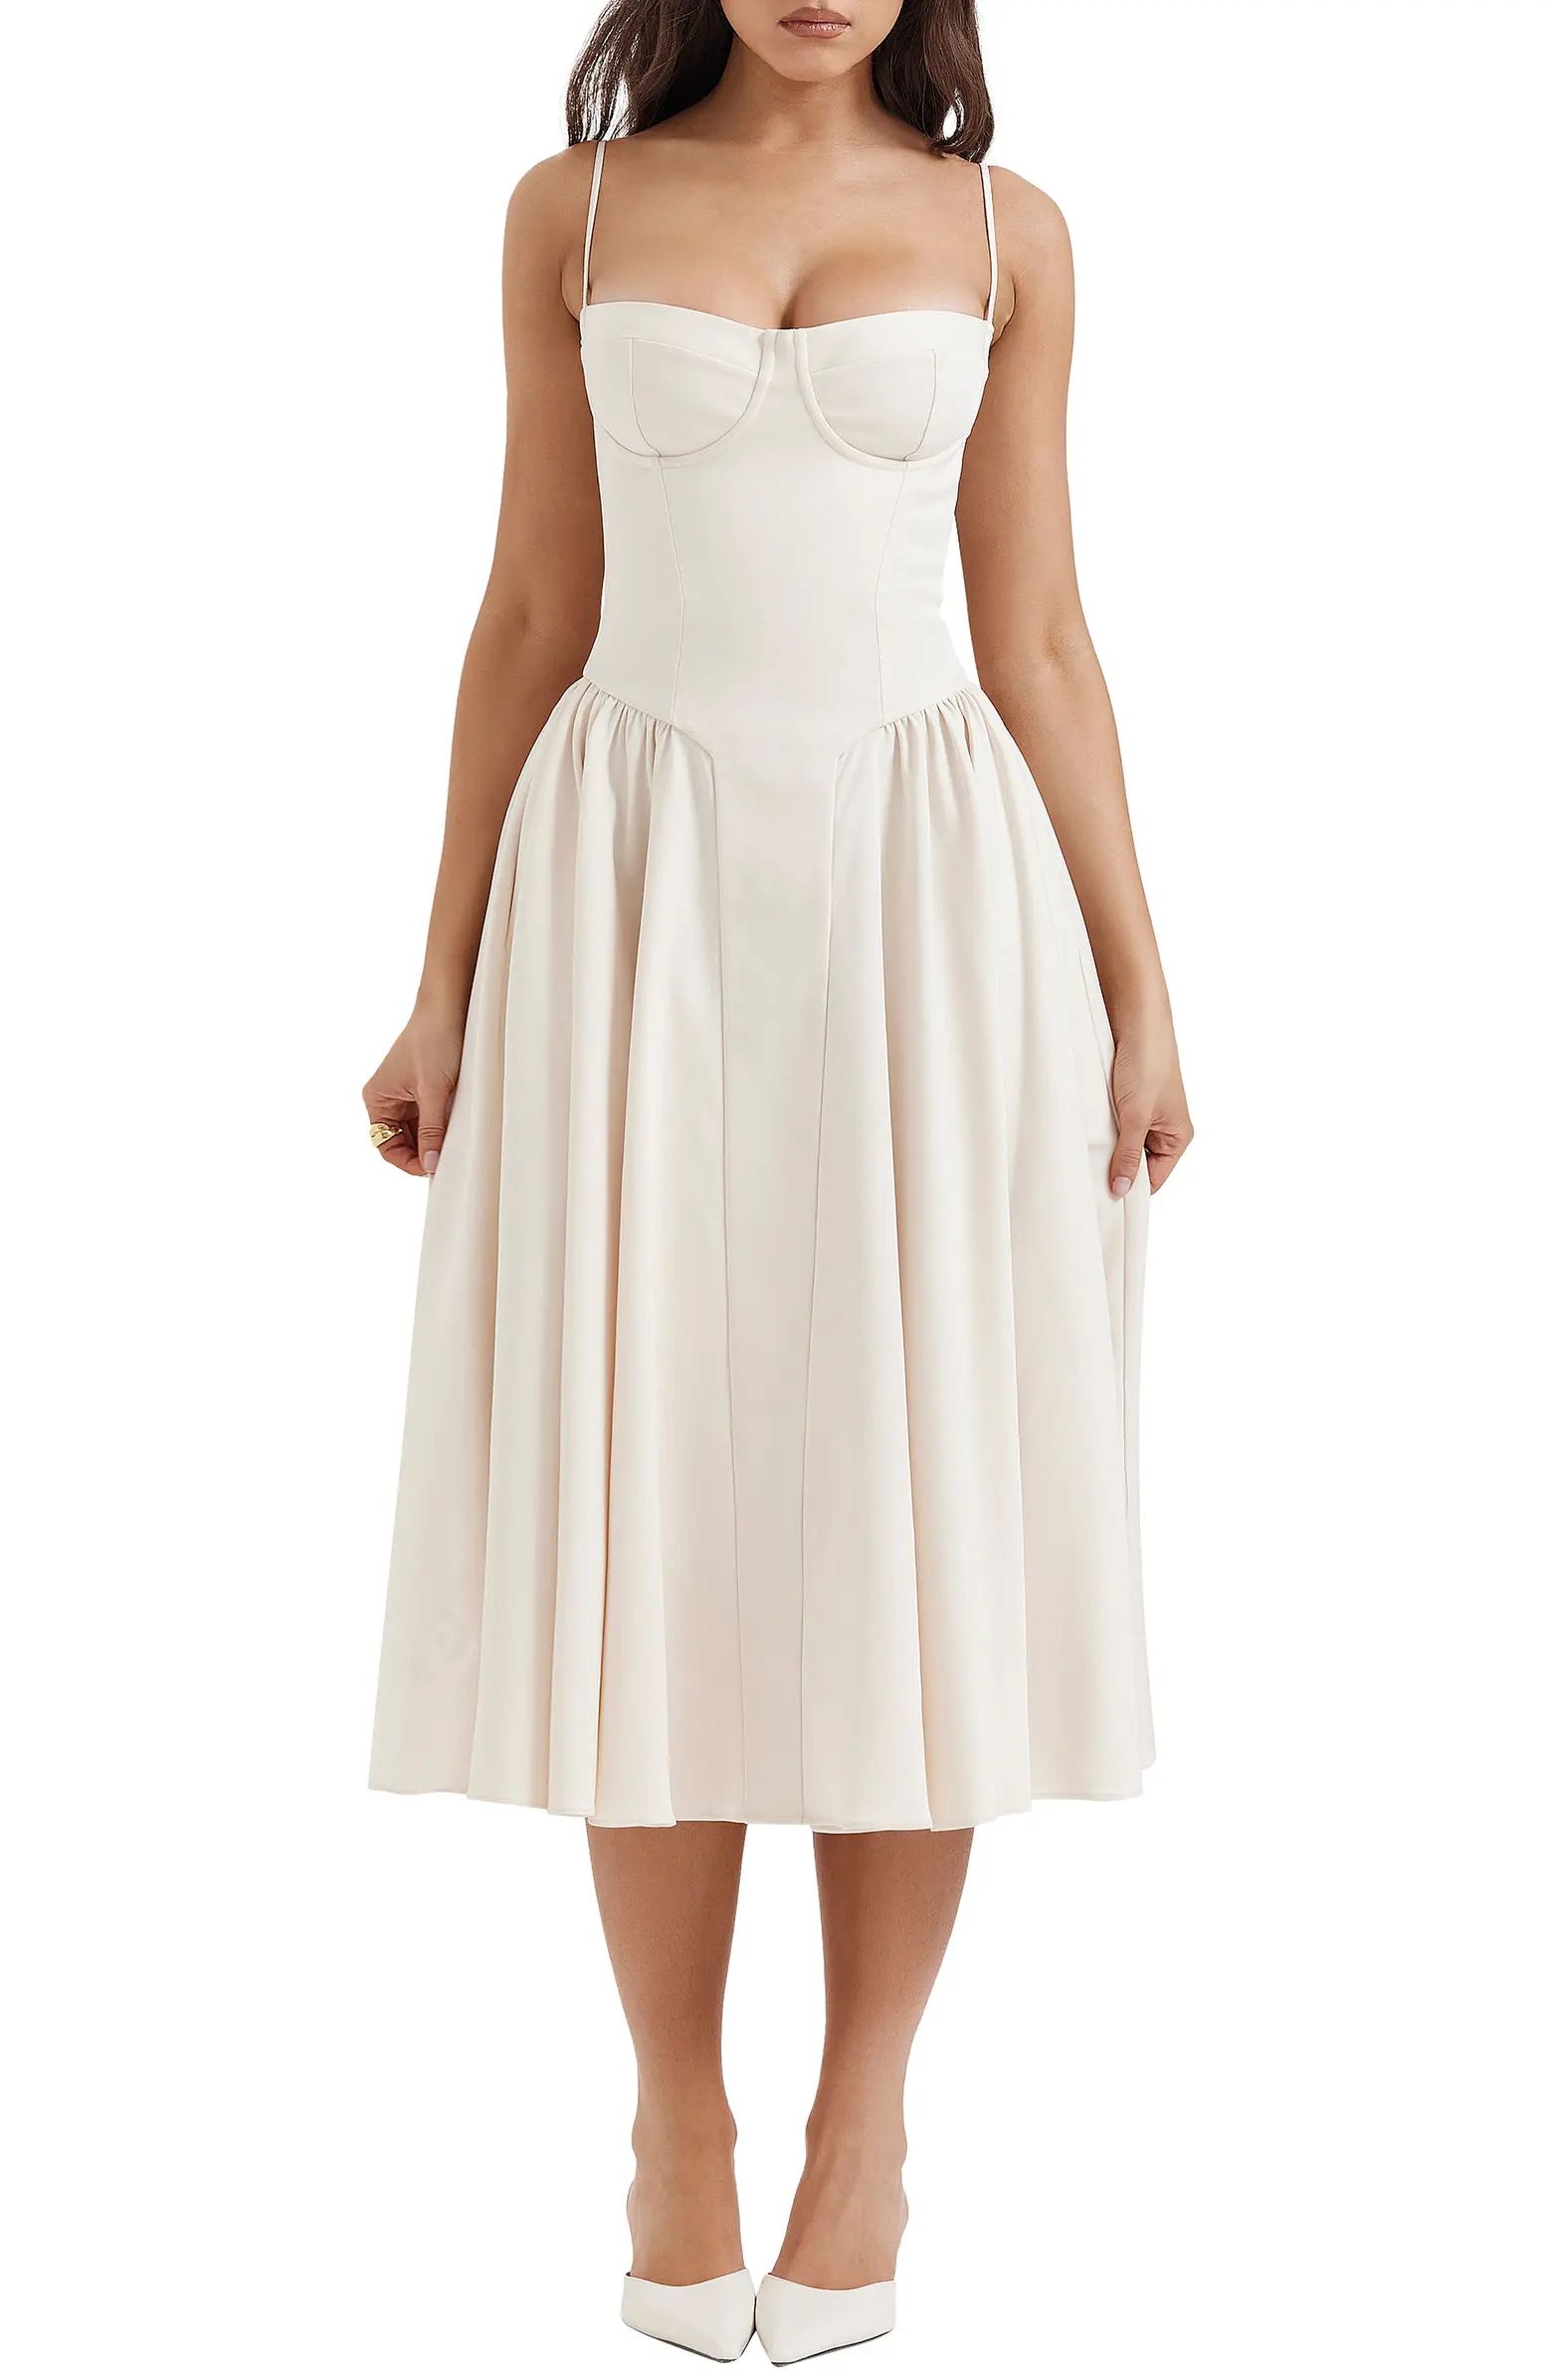 HOUSE OF CB Samaria Corset Fit & Flare Dress | Nordstrom | Nordstrom